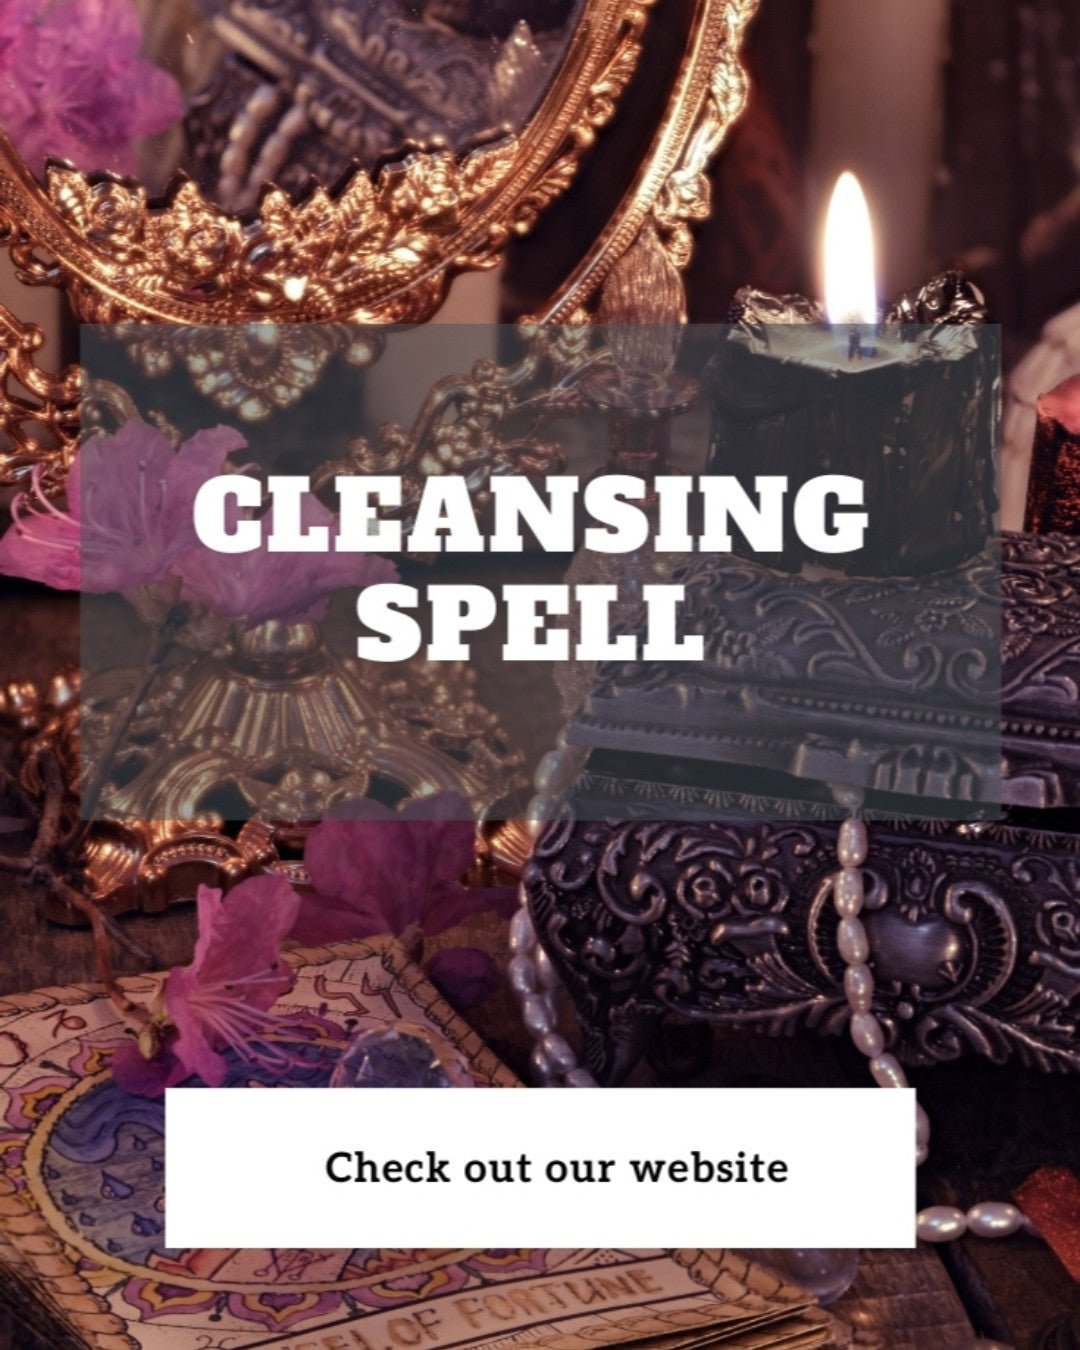 🕯️ Cleansing Spell 🕯️
Done for...